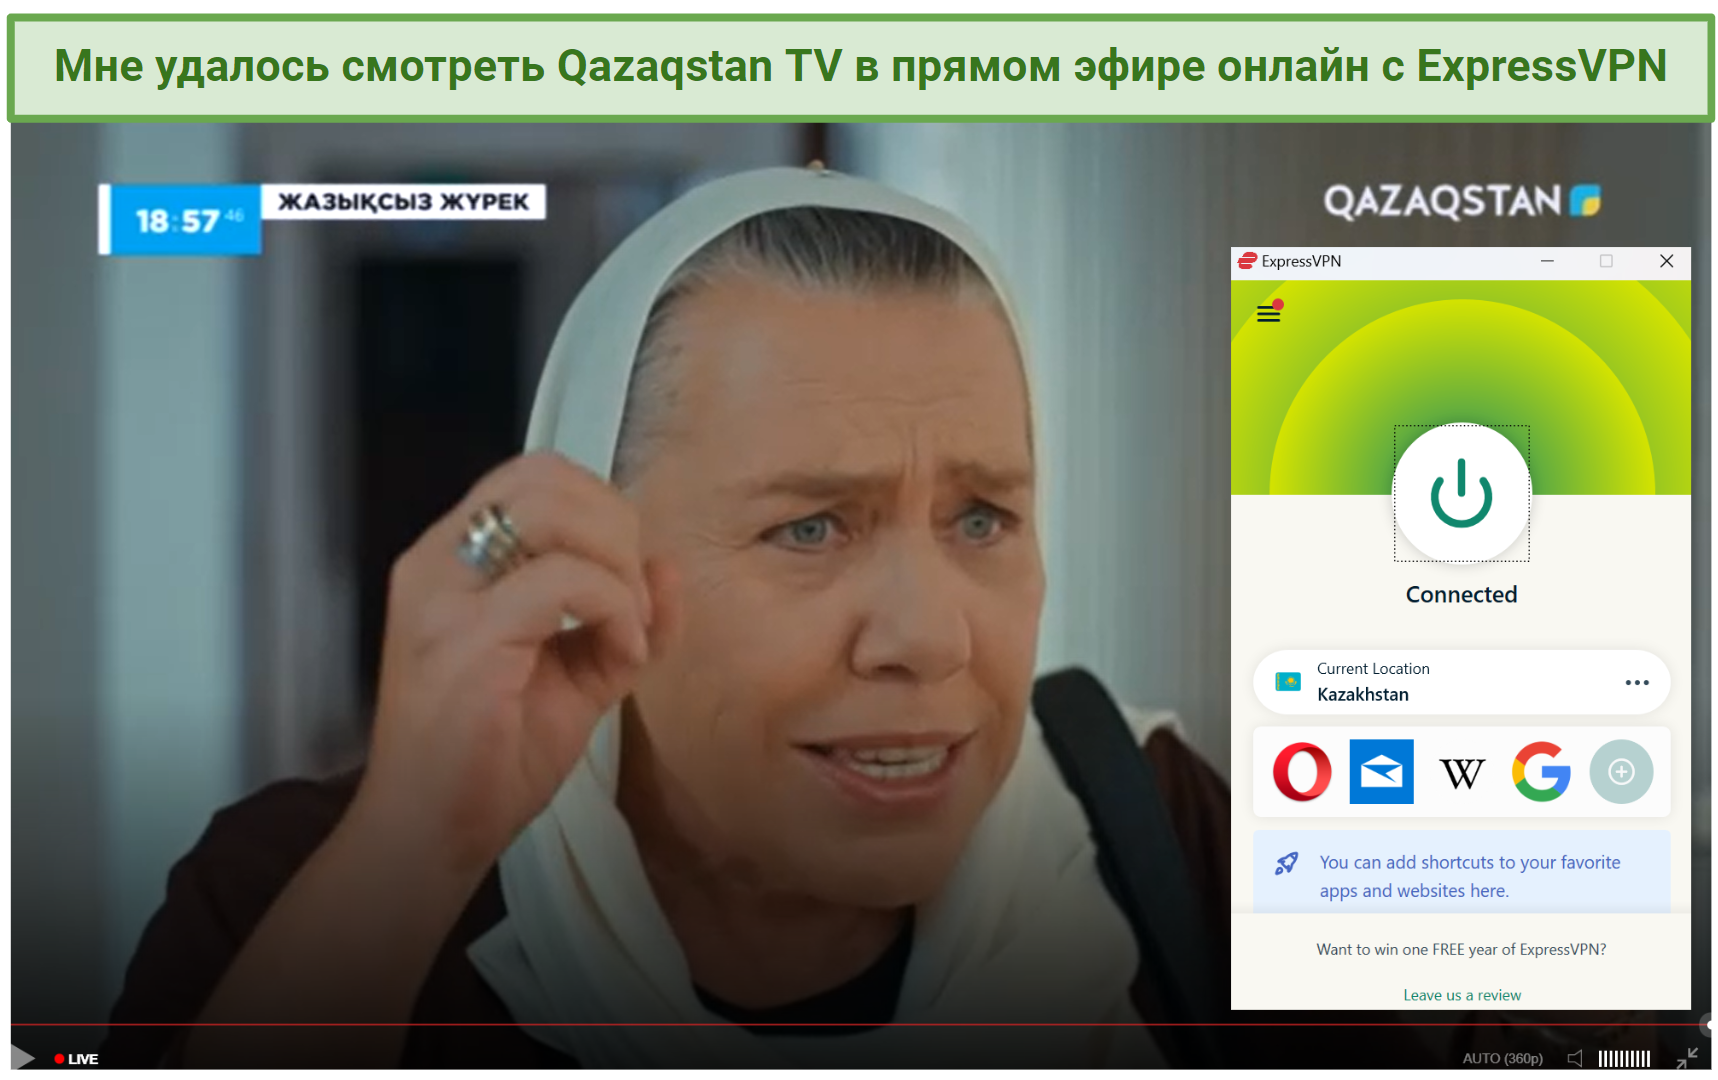 A screenshot of Qazaqstan TV live while connected to ExpressVPN